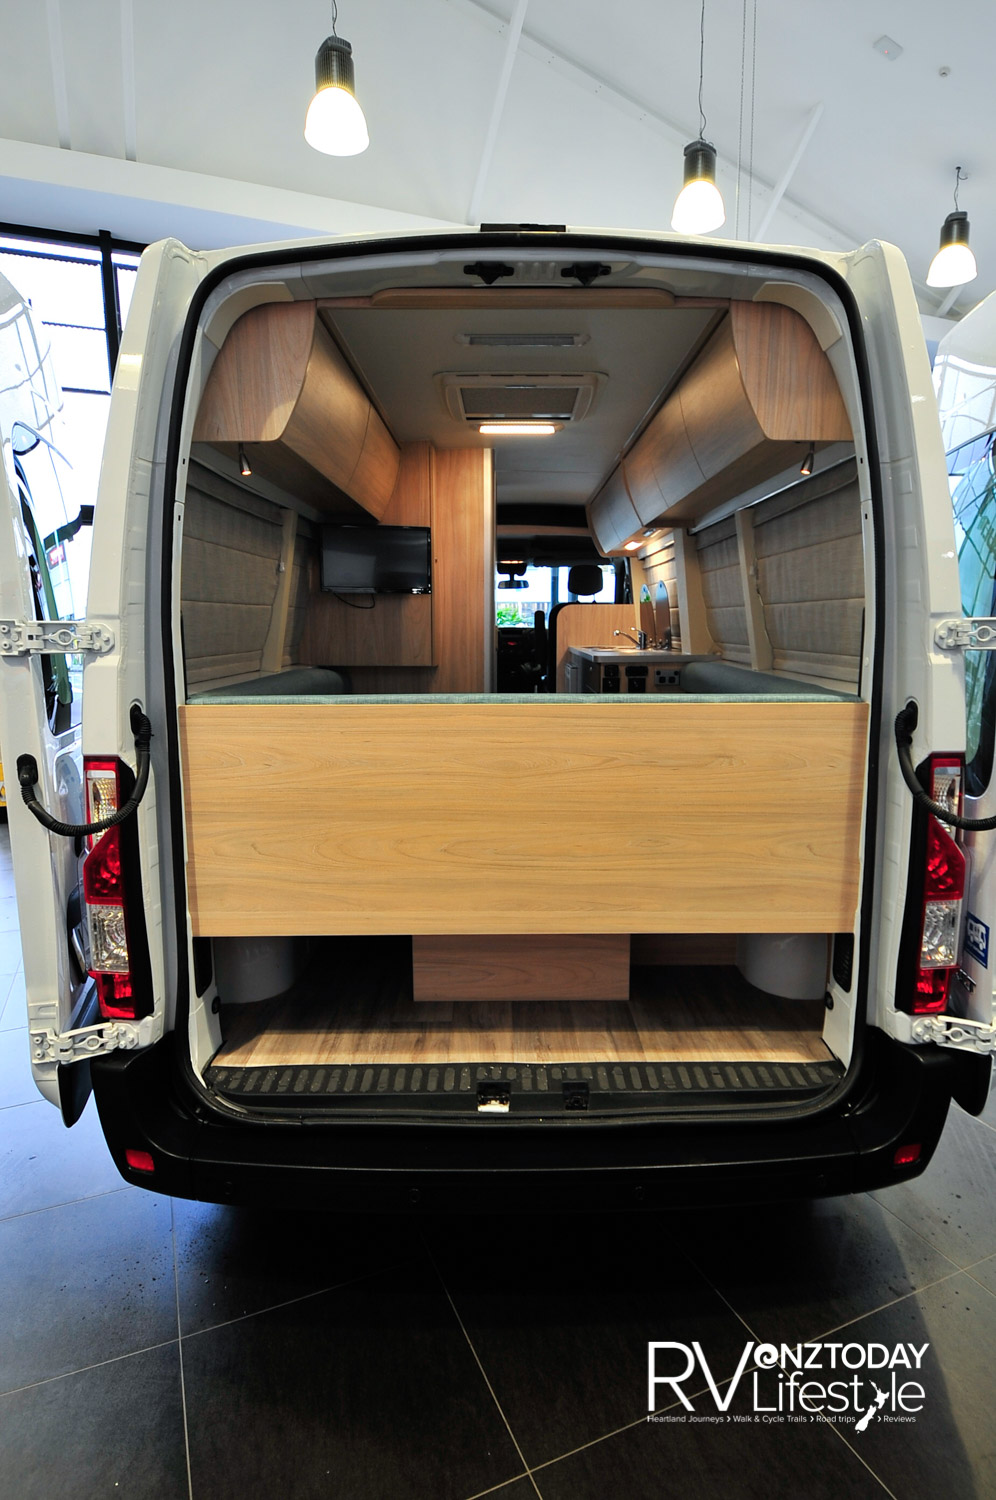 The back doors open right up and secure to the sides. Storage under the back seating